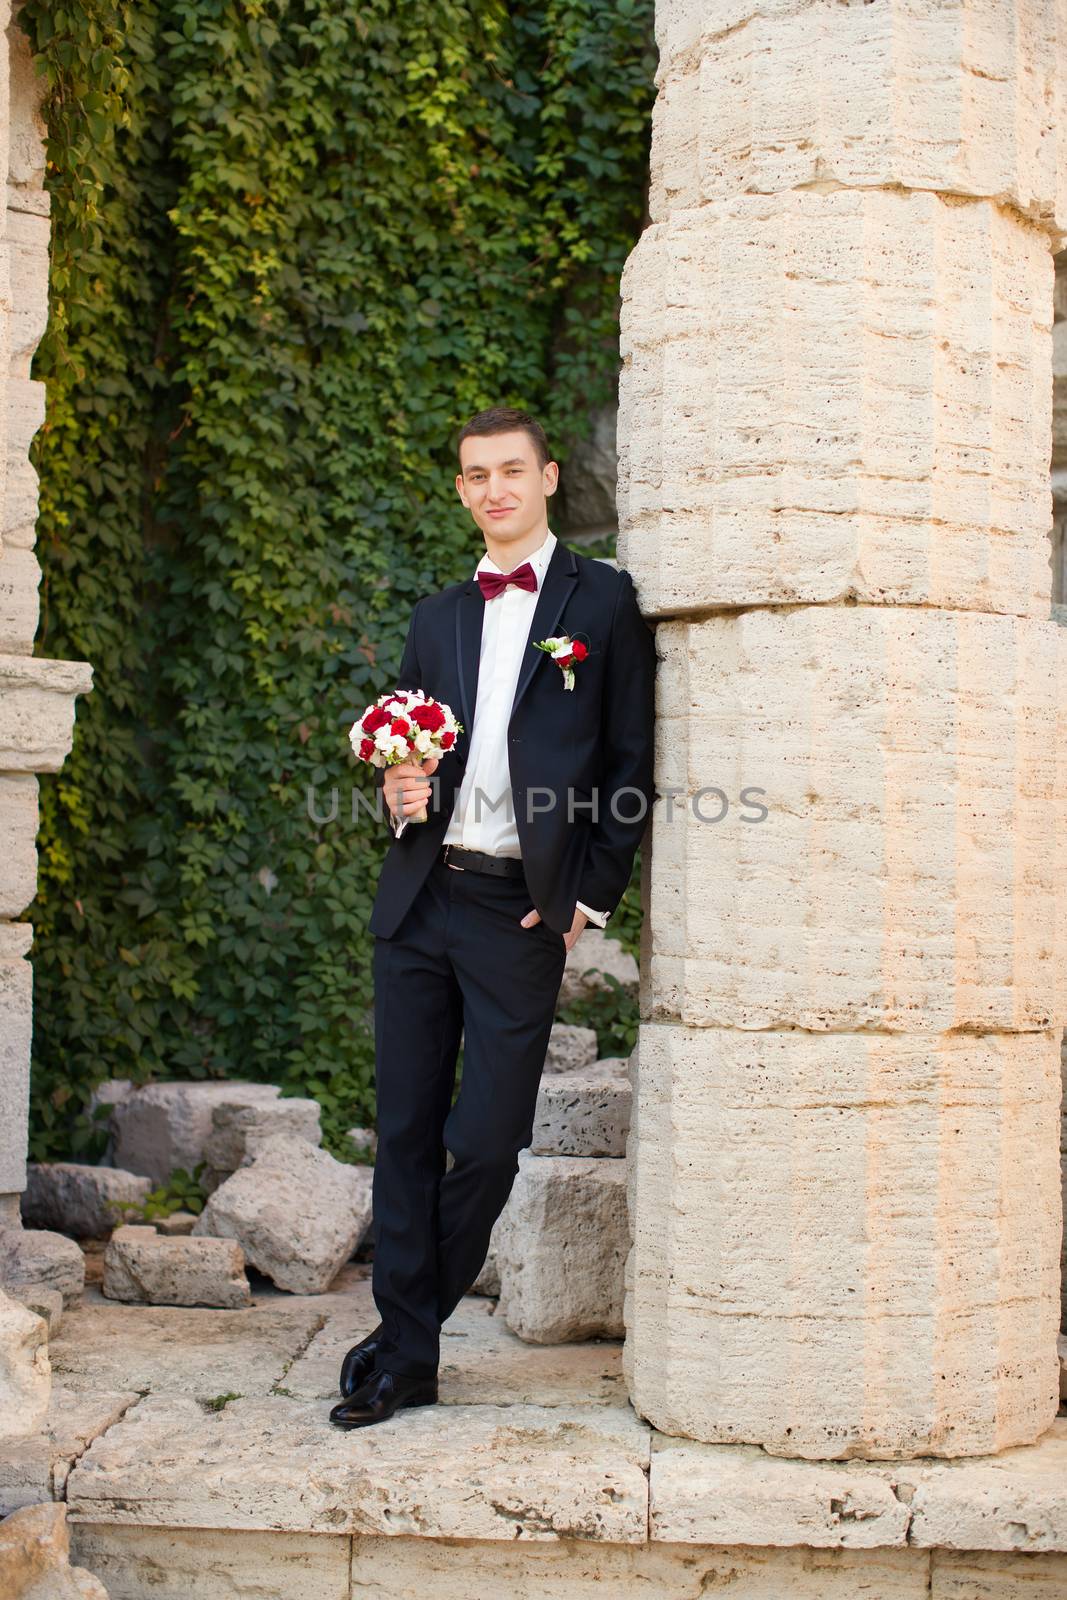 Portrait of the groom in a black suit by lanser314